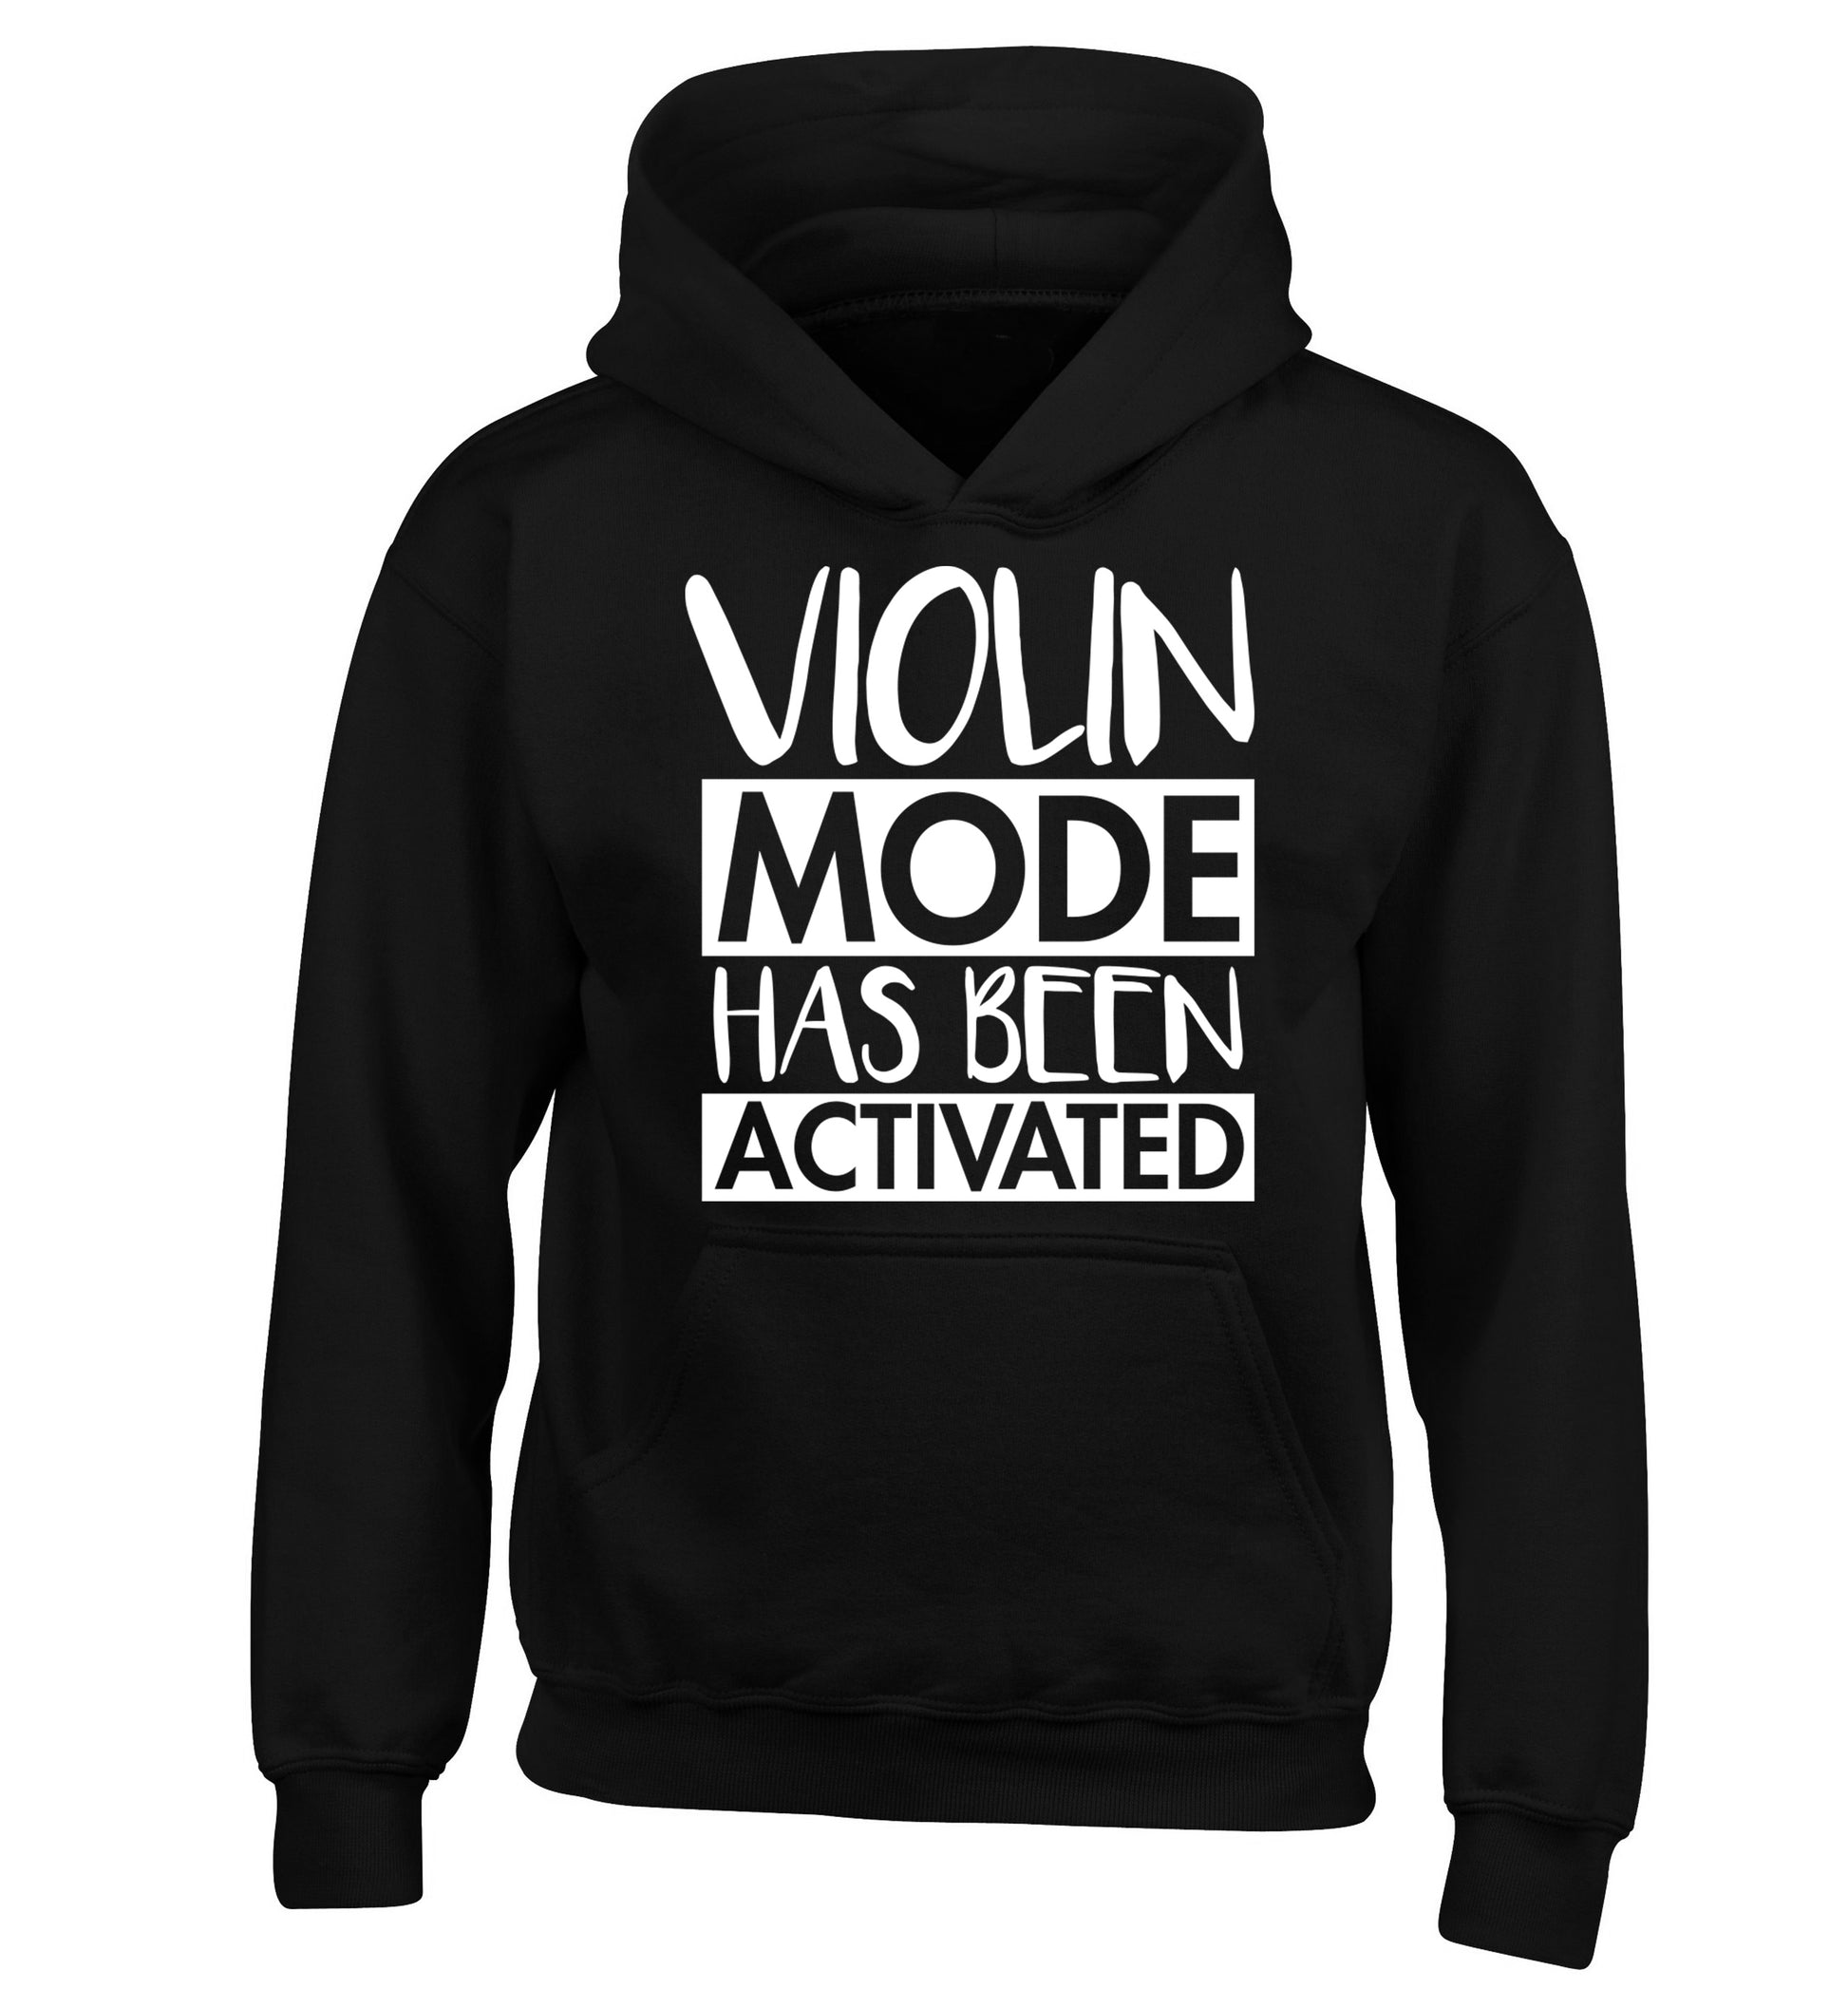 Violin Mode Activated children's black hoodie 12-13 Years